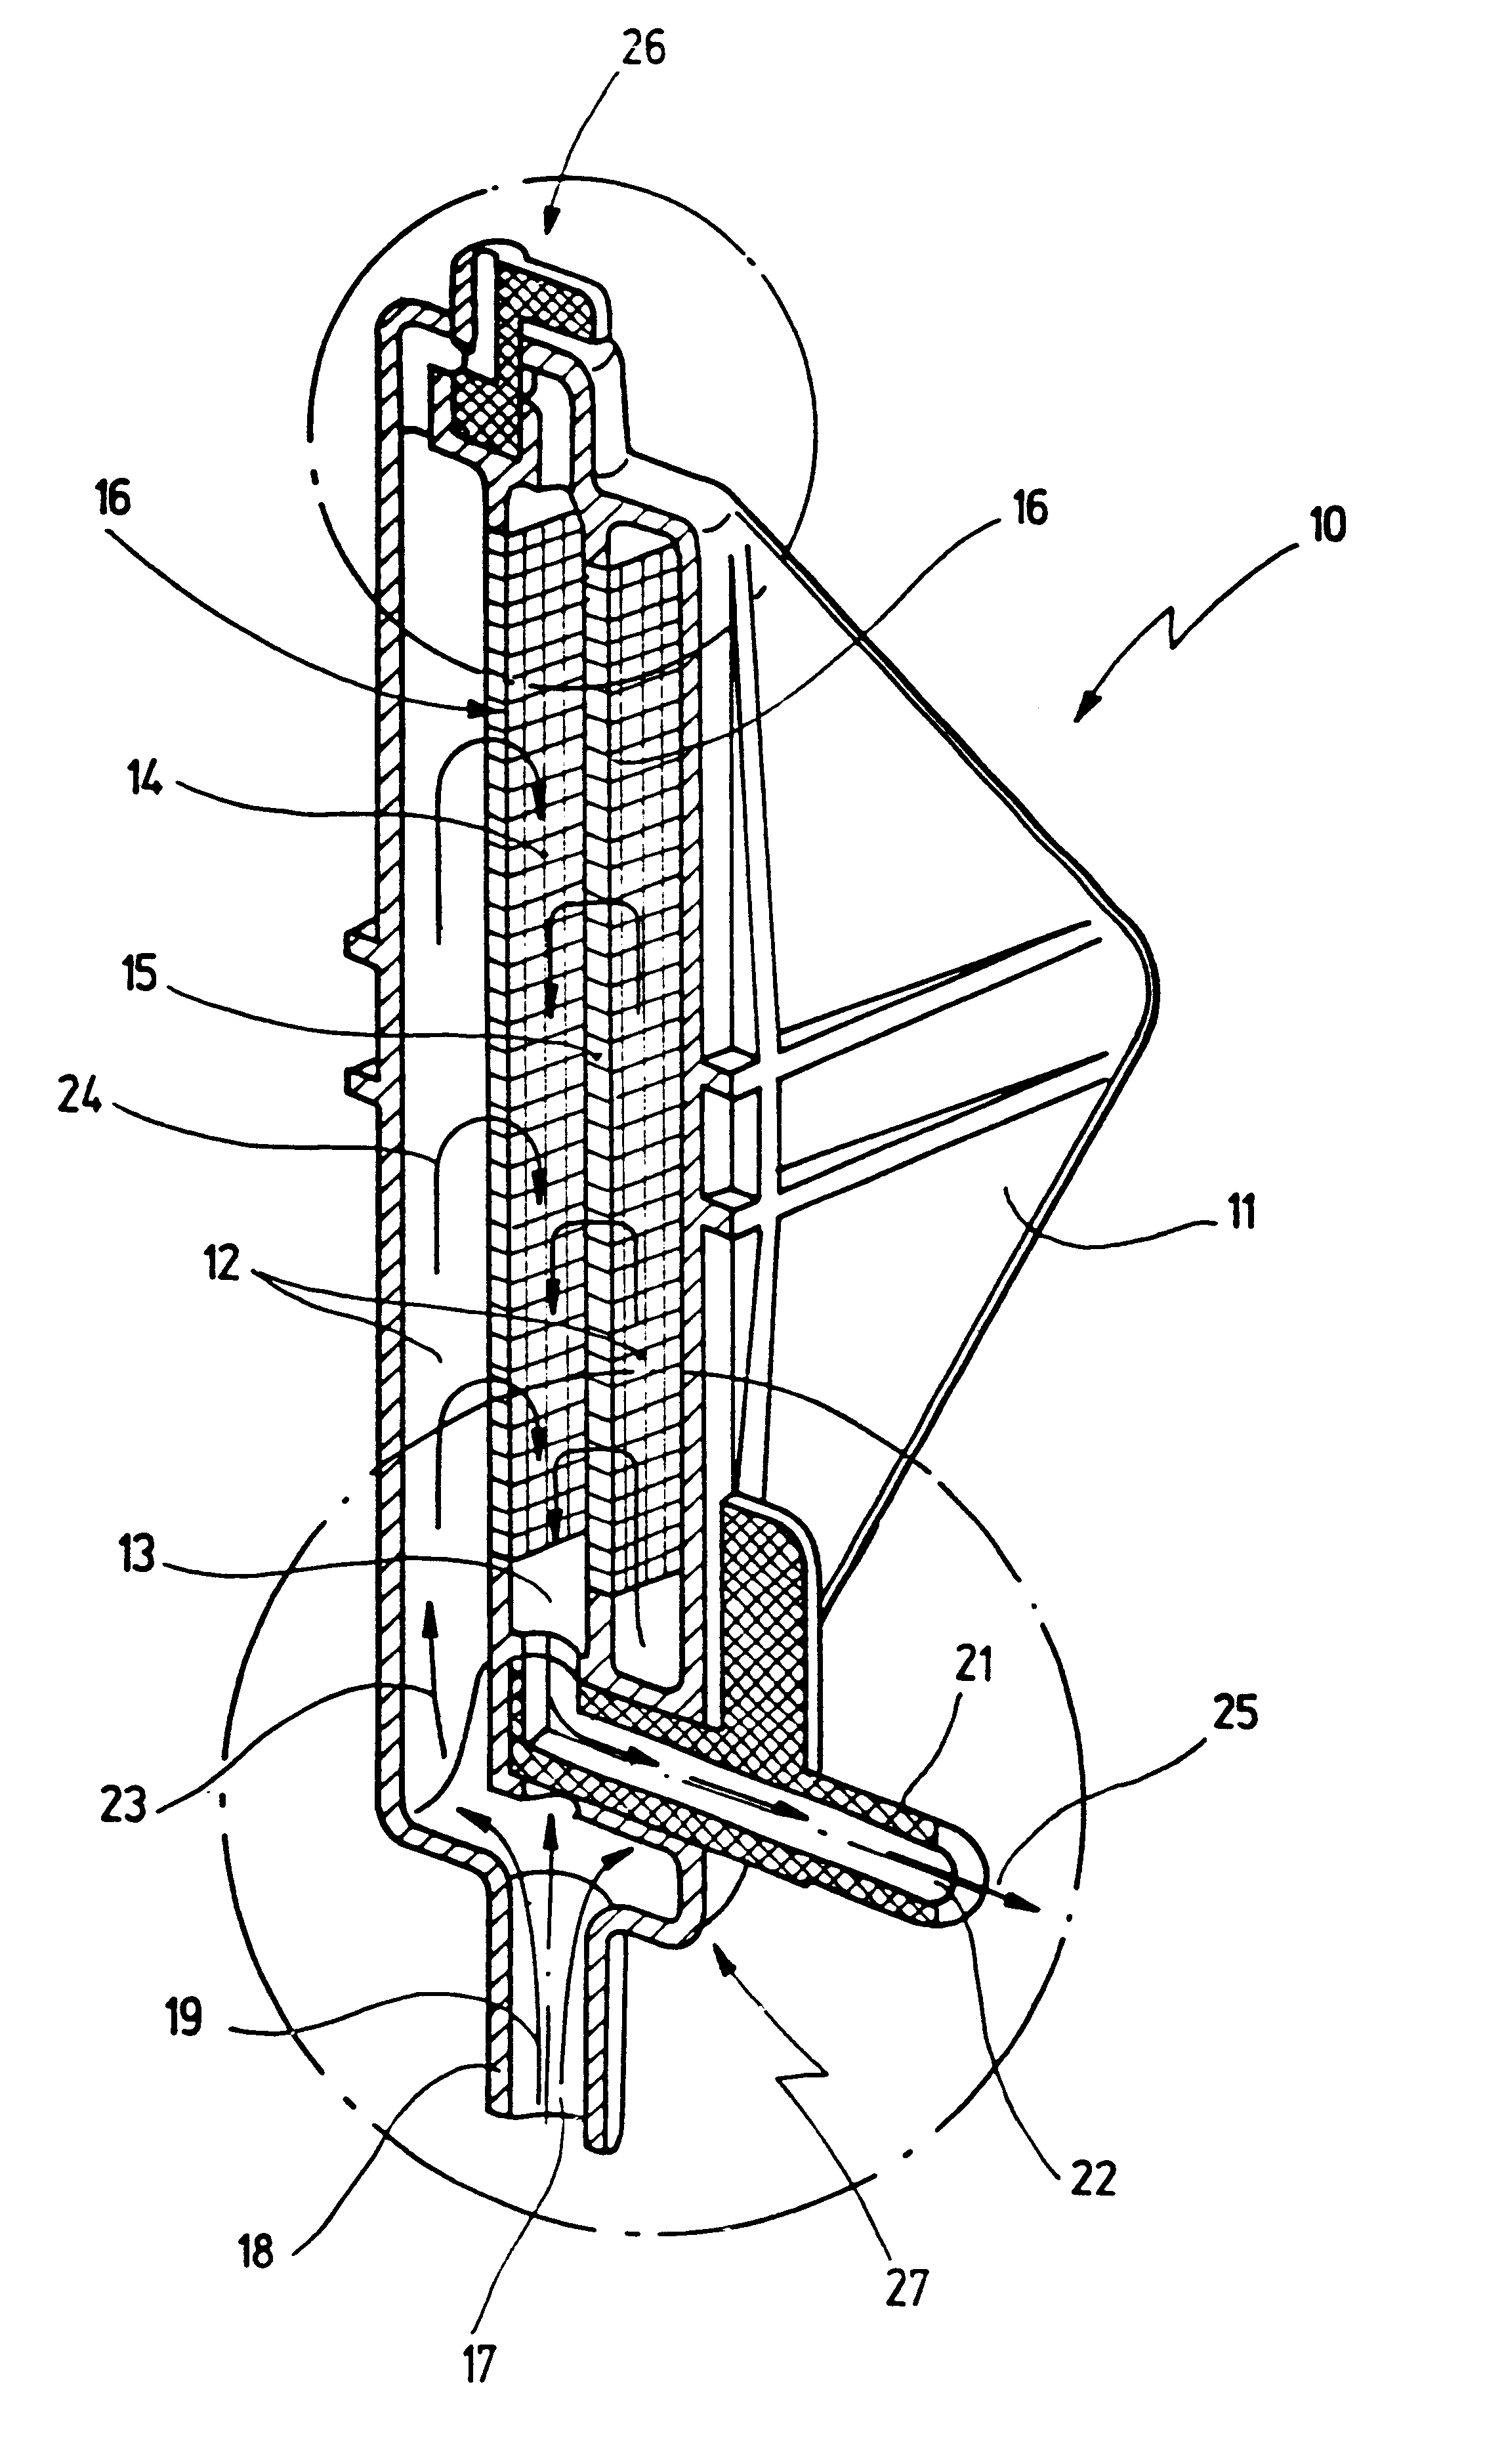 Apparatus for filtering and degassing body fluids, in particular blood filter